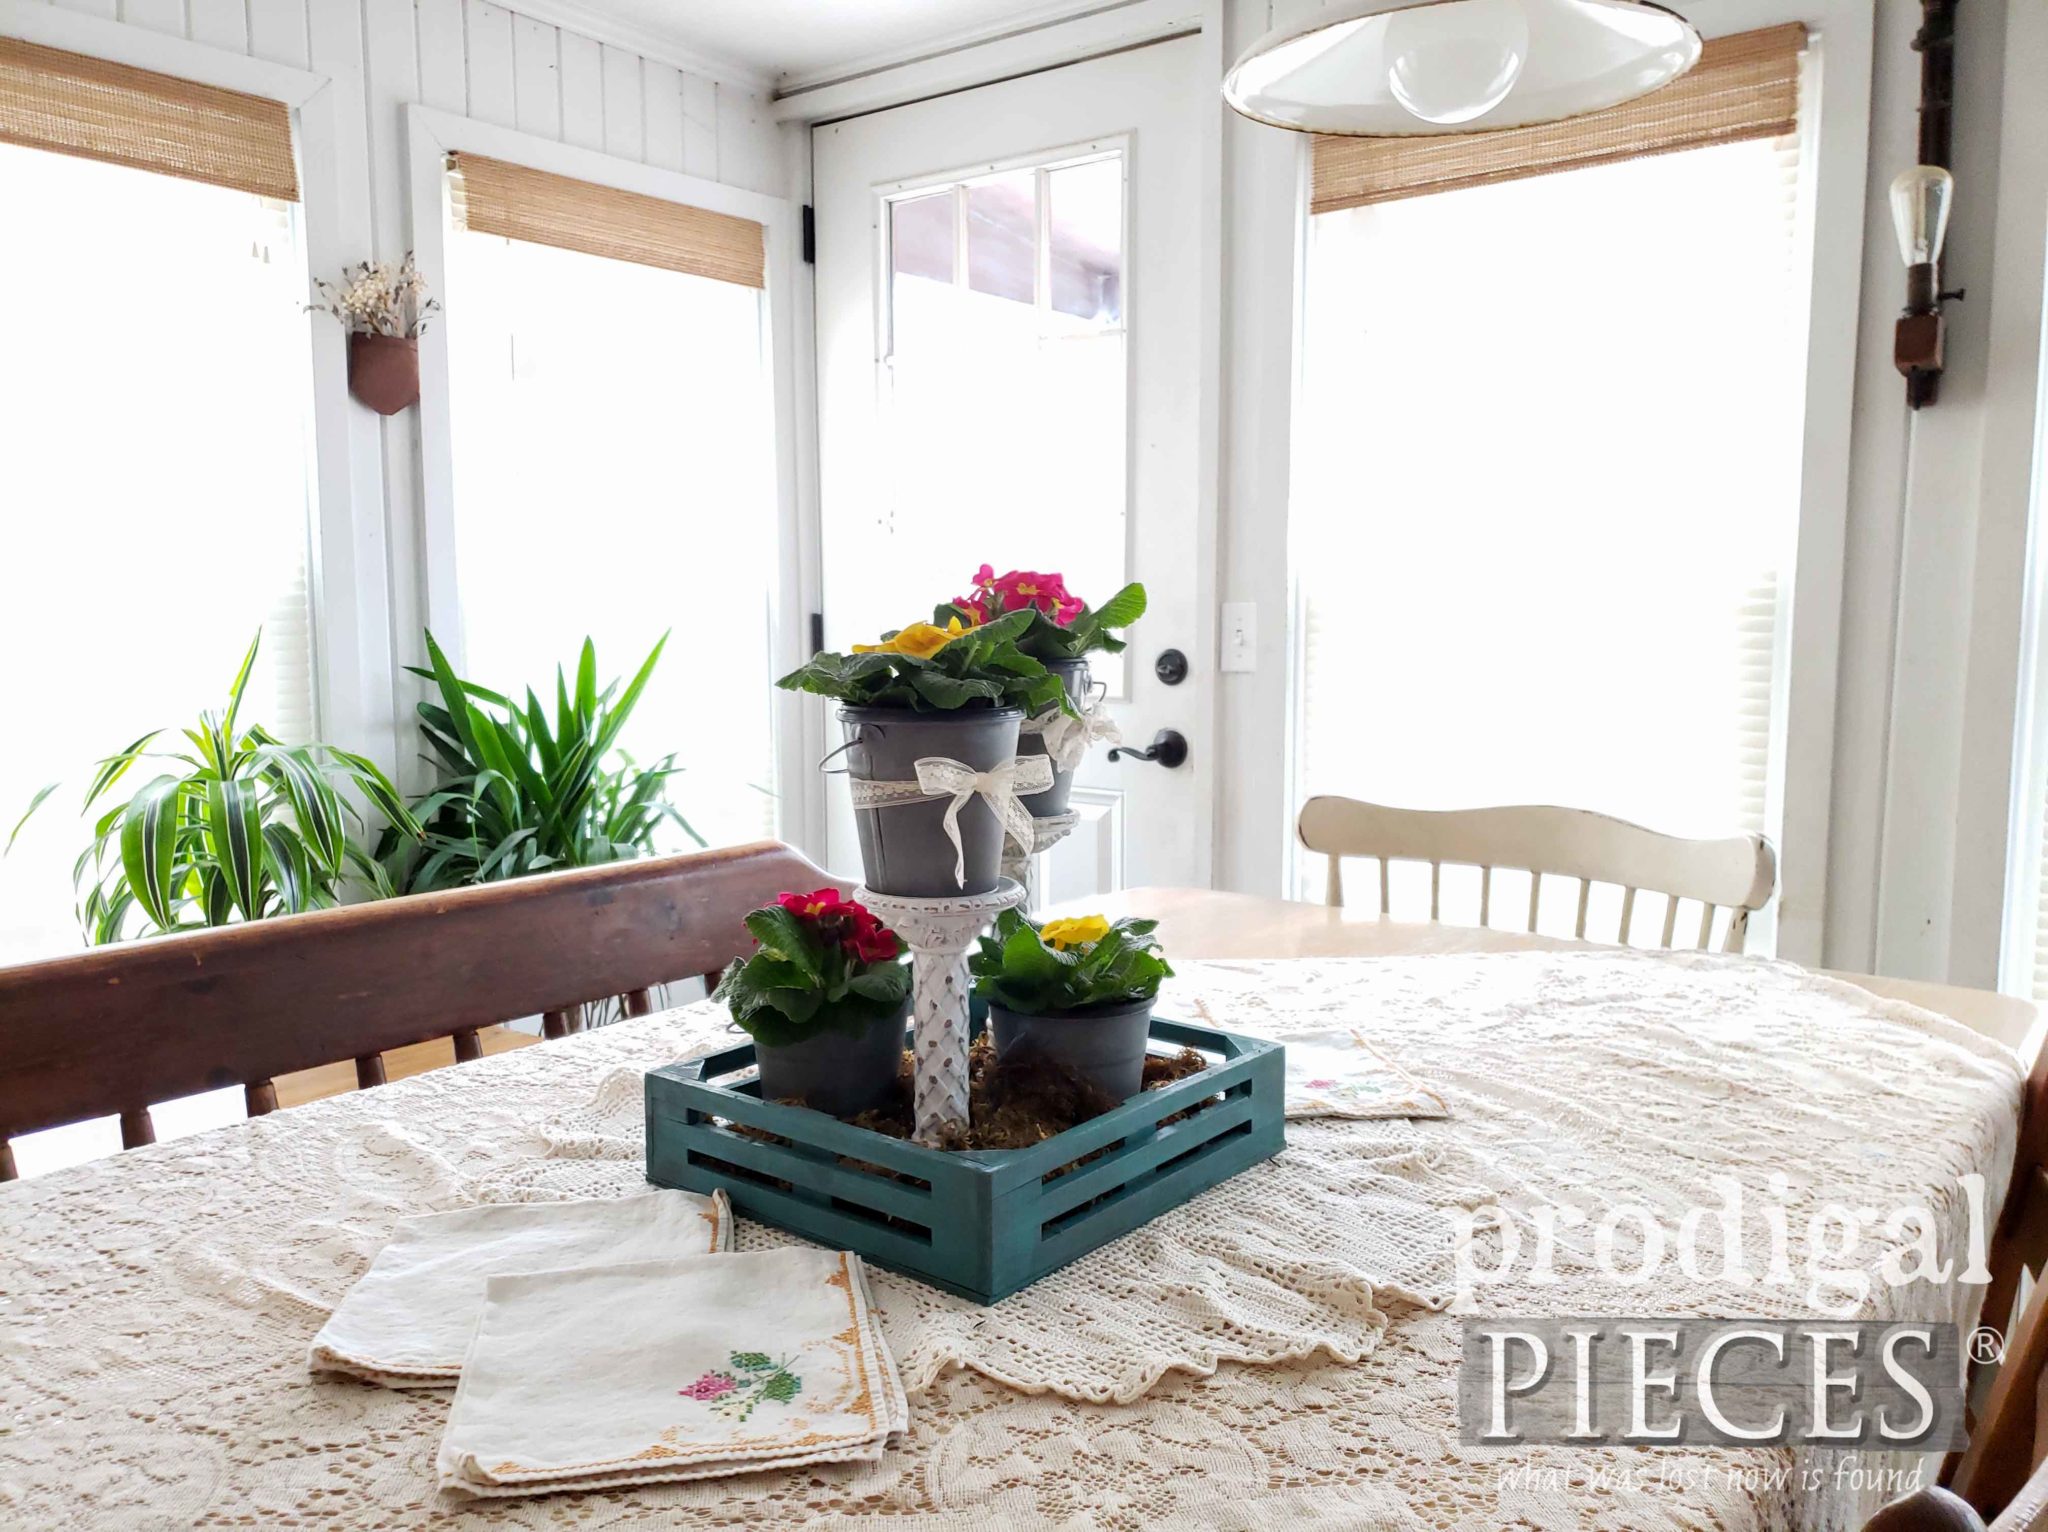 Upcycled DIY Spring Tablescape with Video Tutorial by Larissa of Prodigal Pieces | prodigalpieces.com #prodigalpieces #diy #farmhouse #tablescape #vintage #handmade #homedecor #homedecorideas